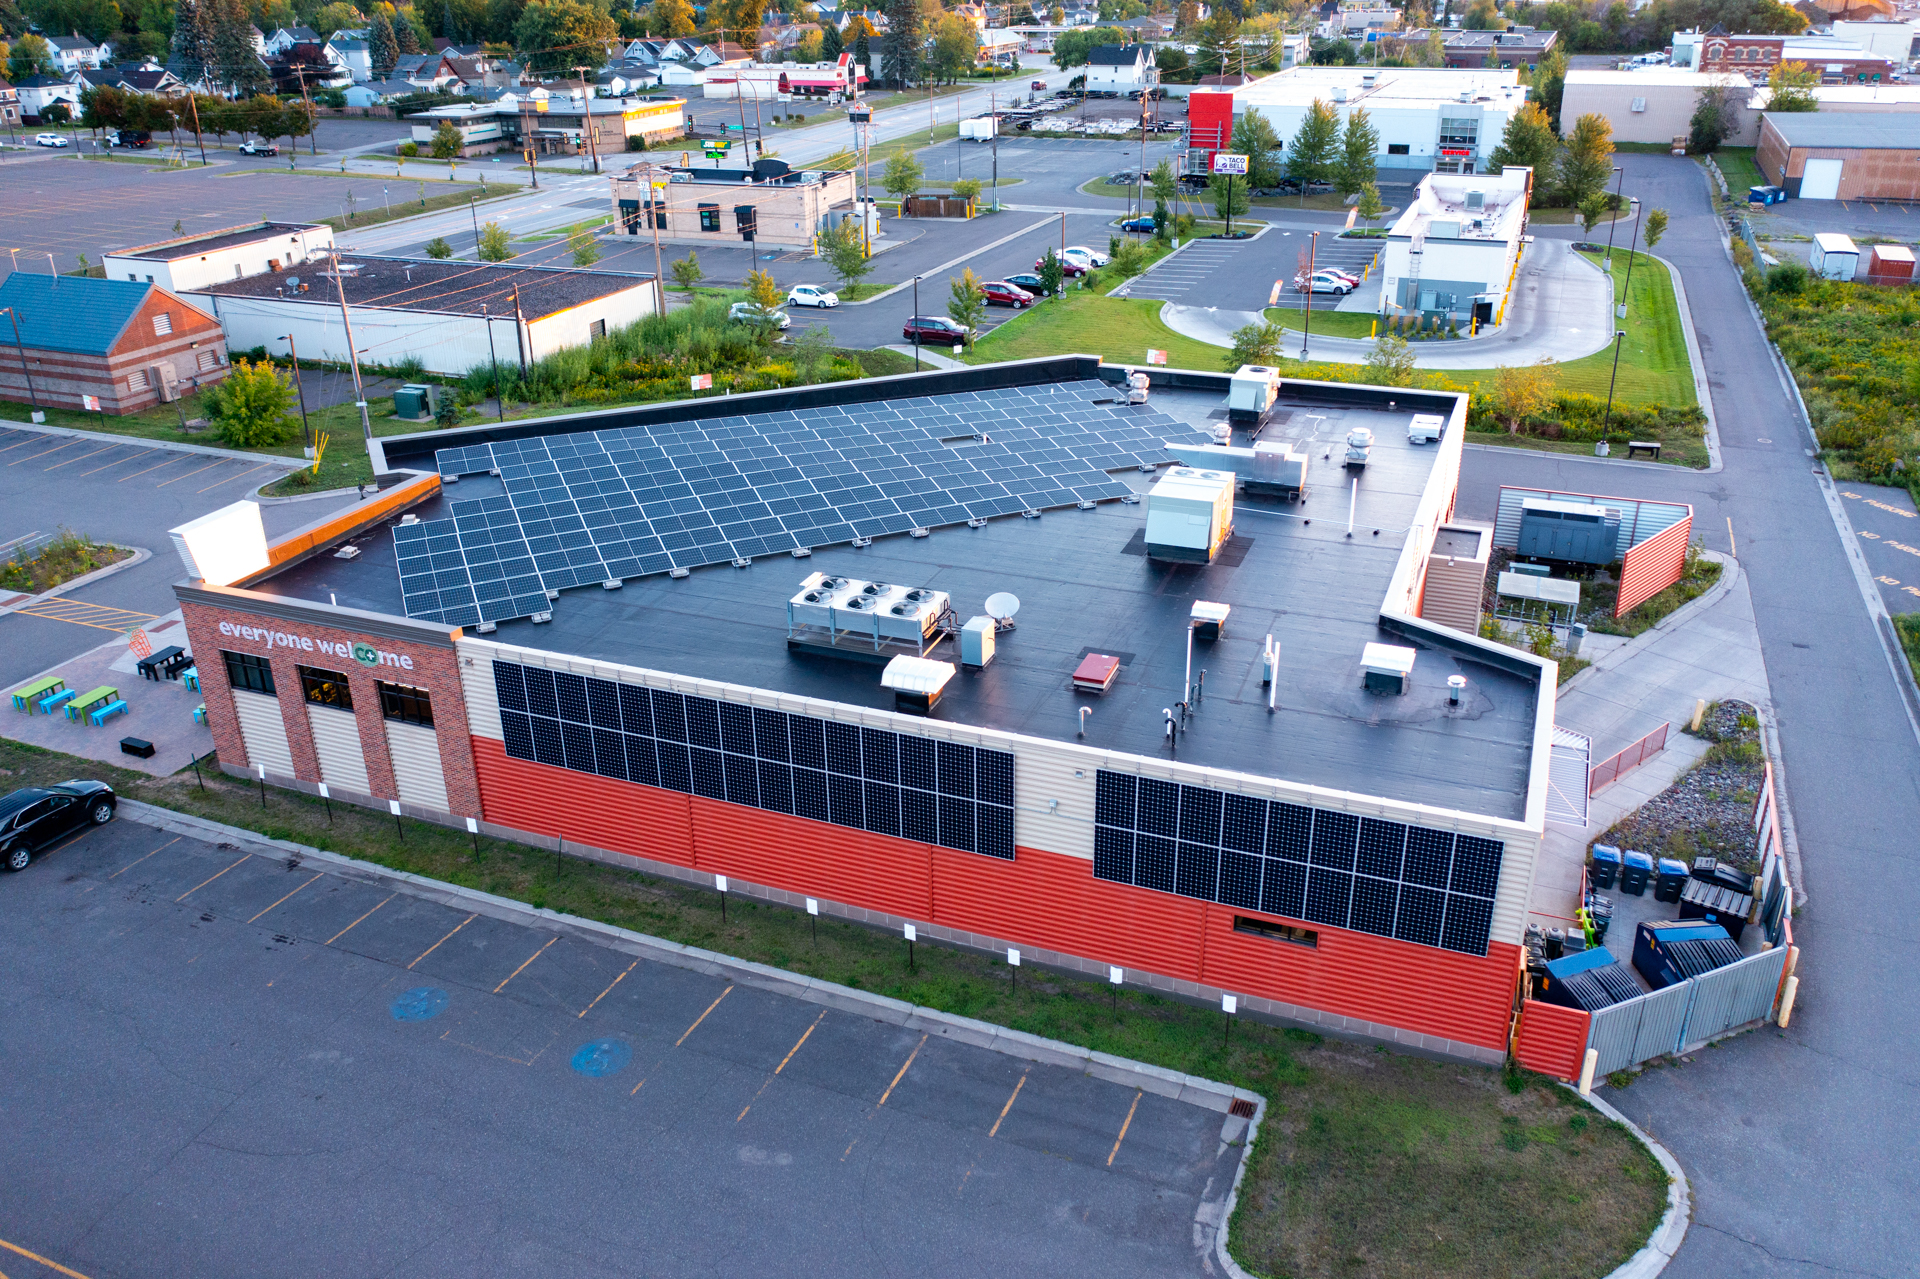 Aerial view of a modern Whole Foods Coop Duluth MN commercial building with solar panels installed on the roof. The building is surrounded by parking lots and other commercial structures. The words "everyone welcome" are displayed on one side of the building. Trees and greenery are in the background.